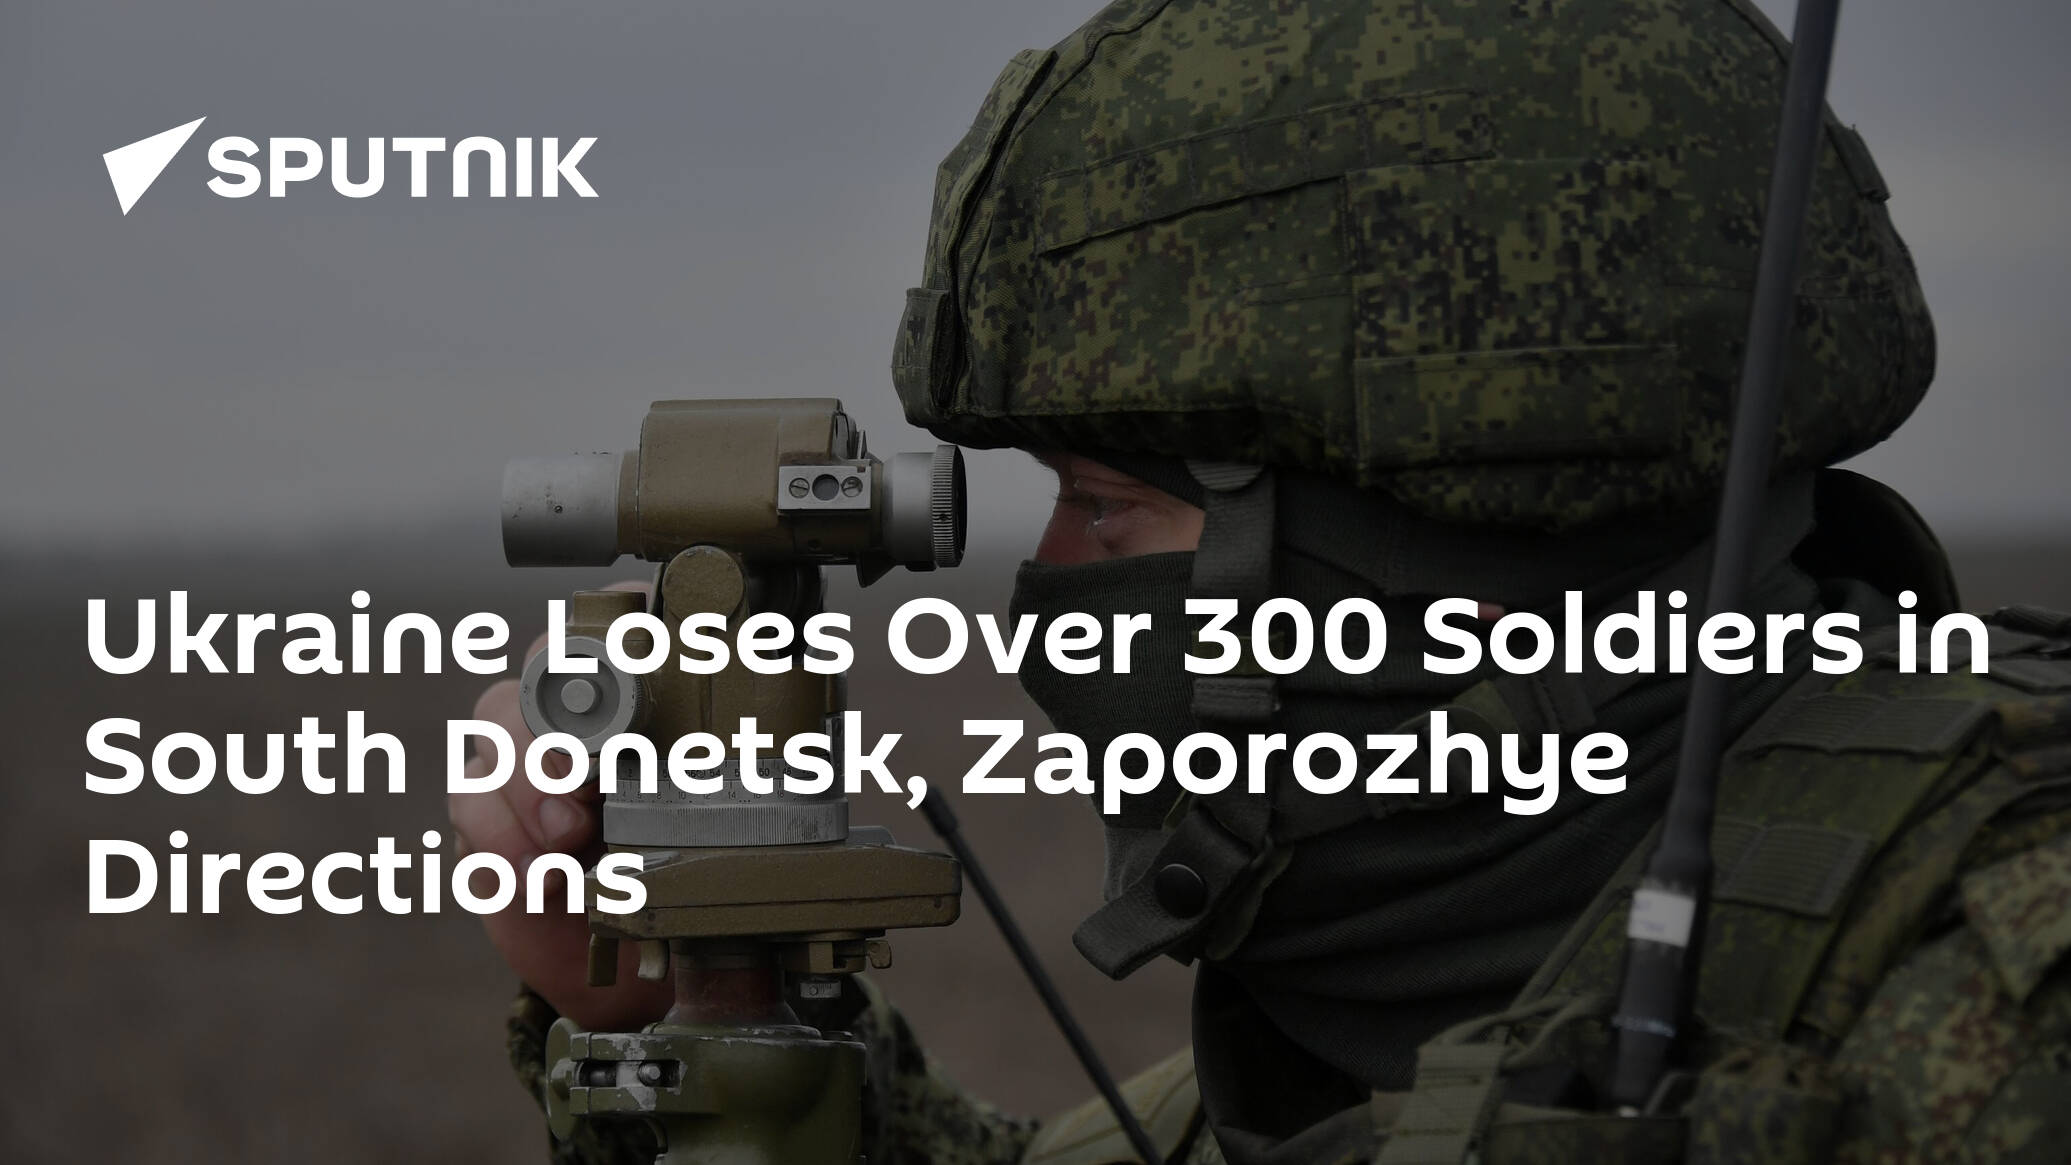 Ukraine Loses Over 300 Soldiers in South Donetsk, Zaporozhye Directions